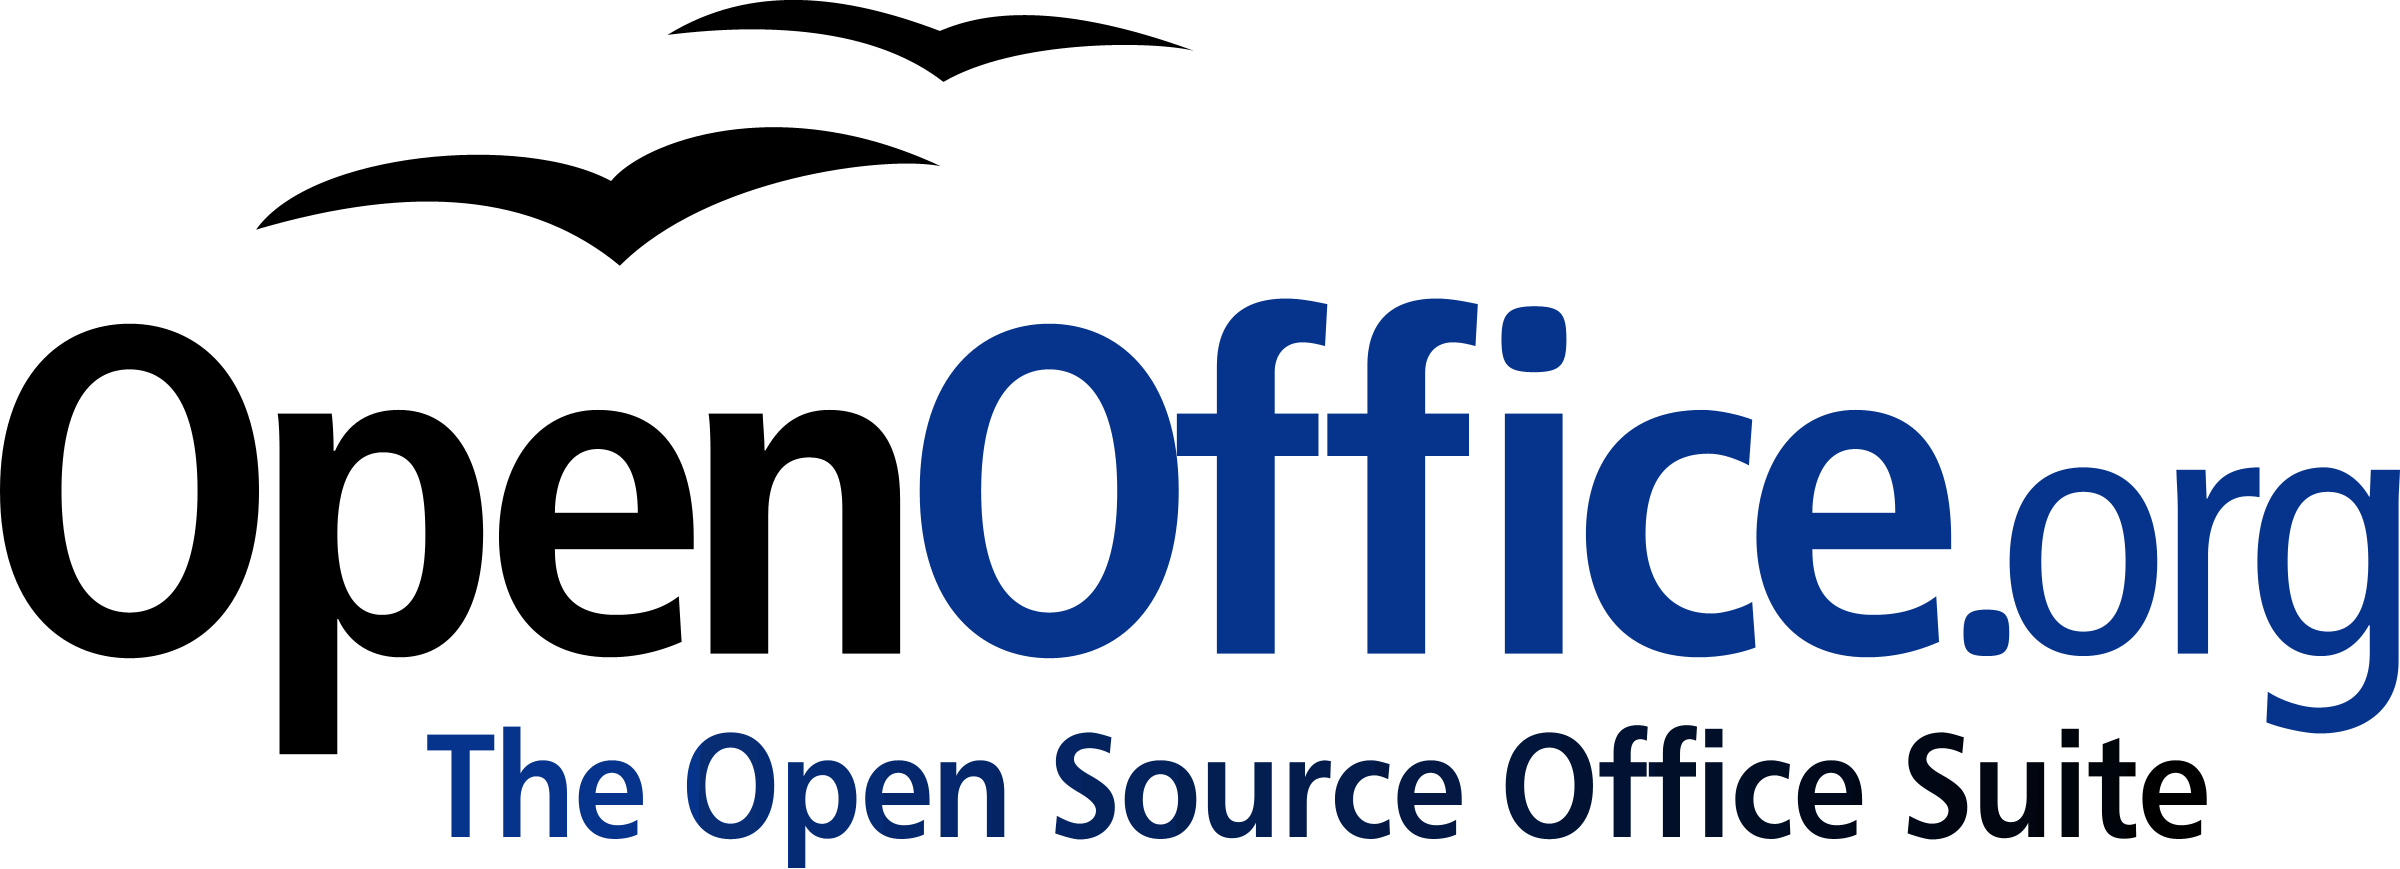 open source word processing software writer